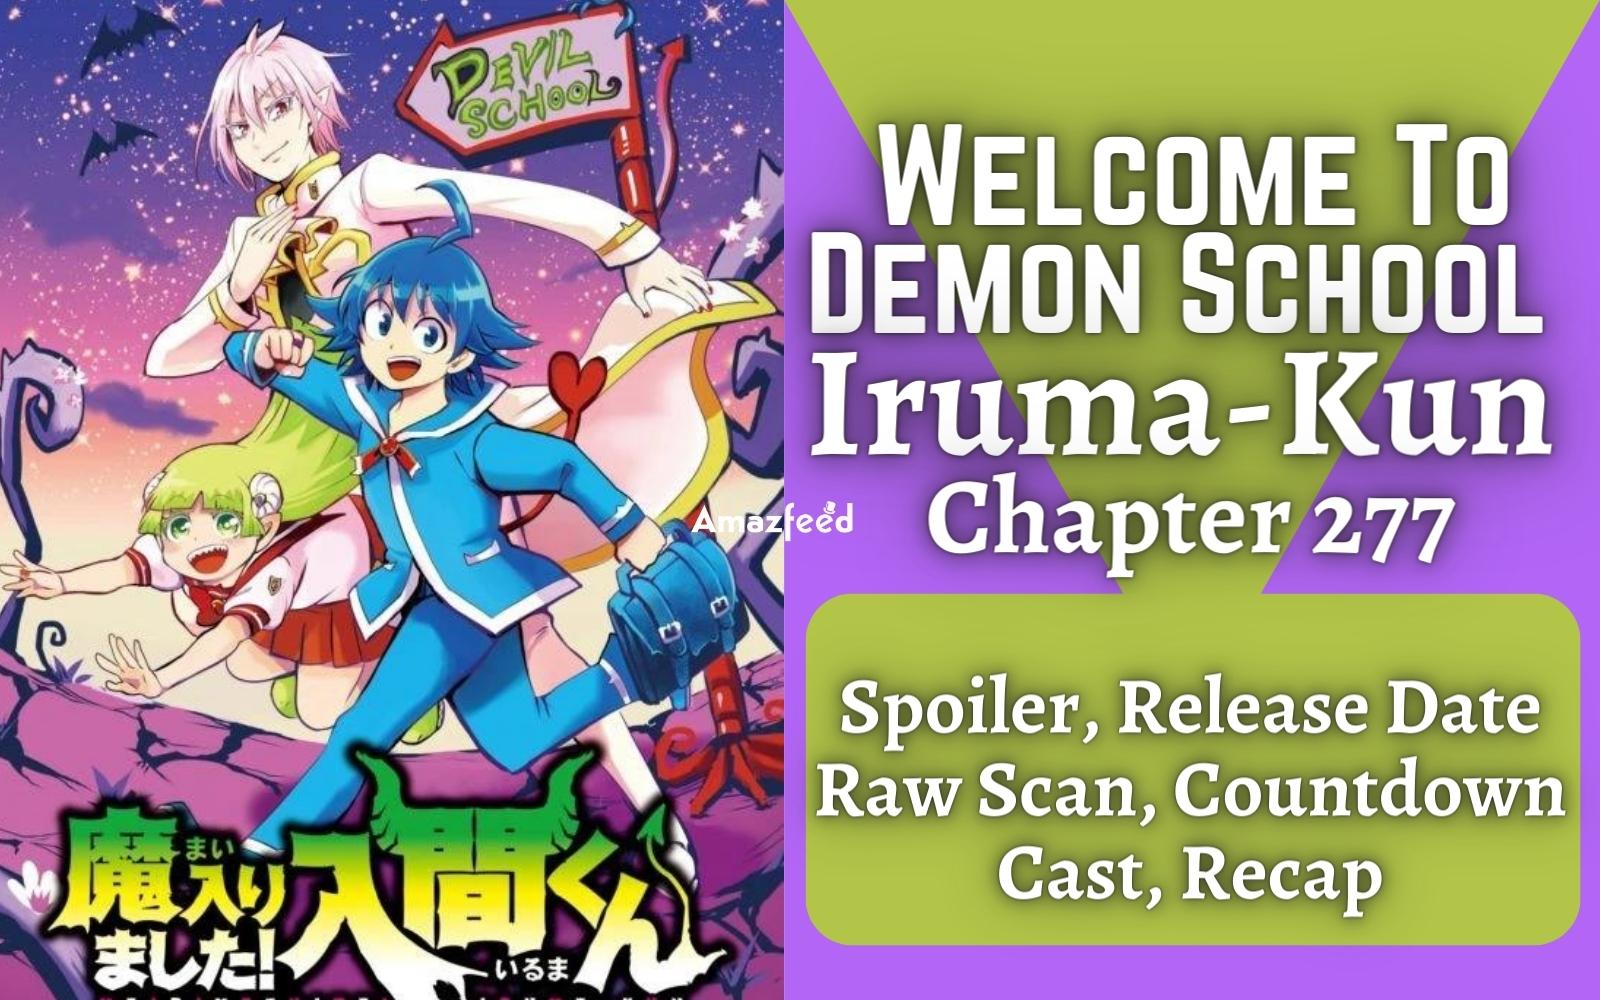 Welcome To Demon School Iruma-Kun Chapter 277 Spoiler, Release Date - Everything we know so far